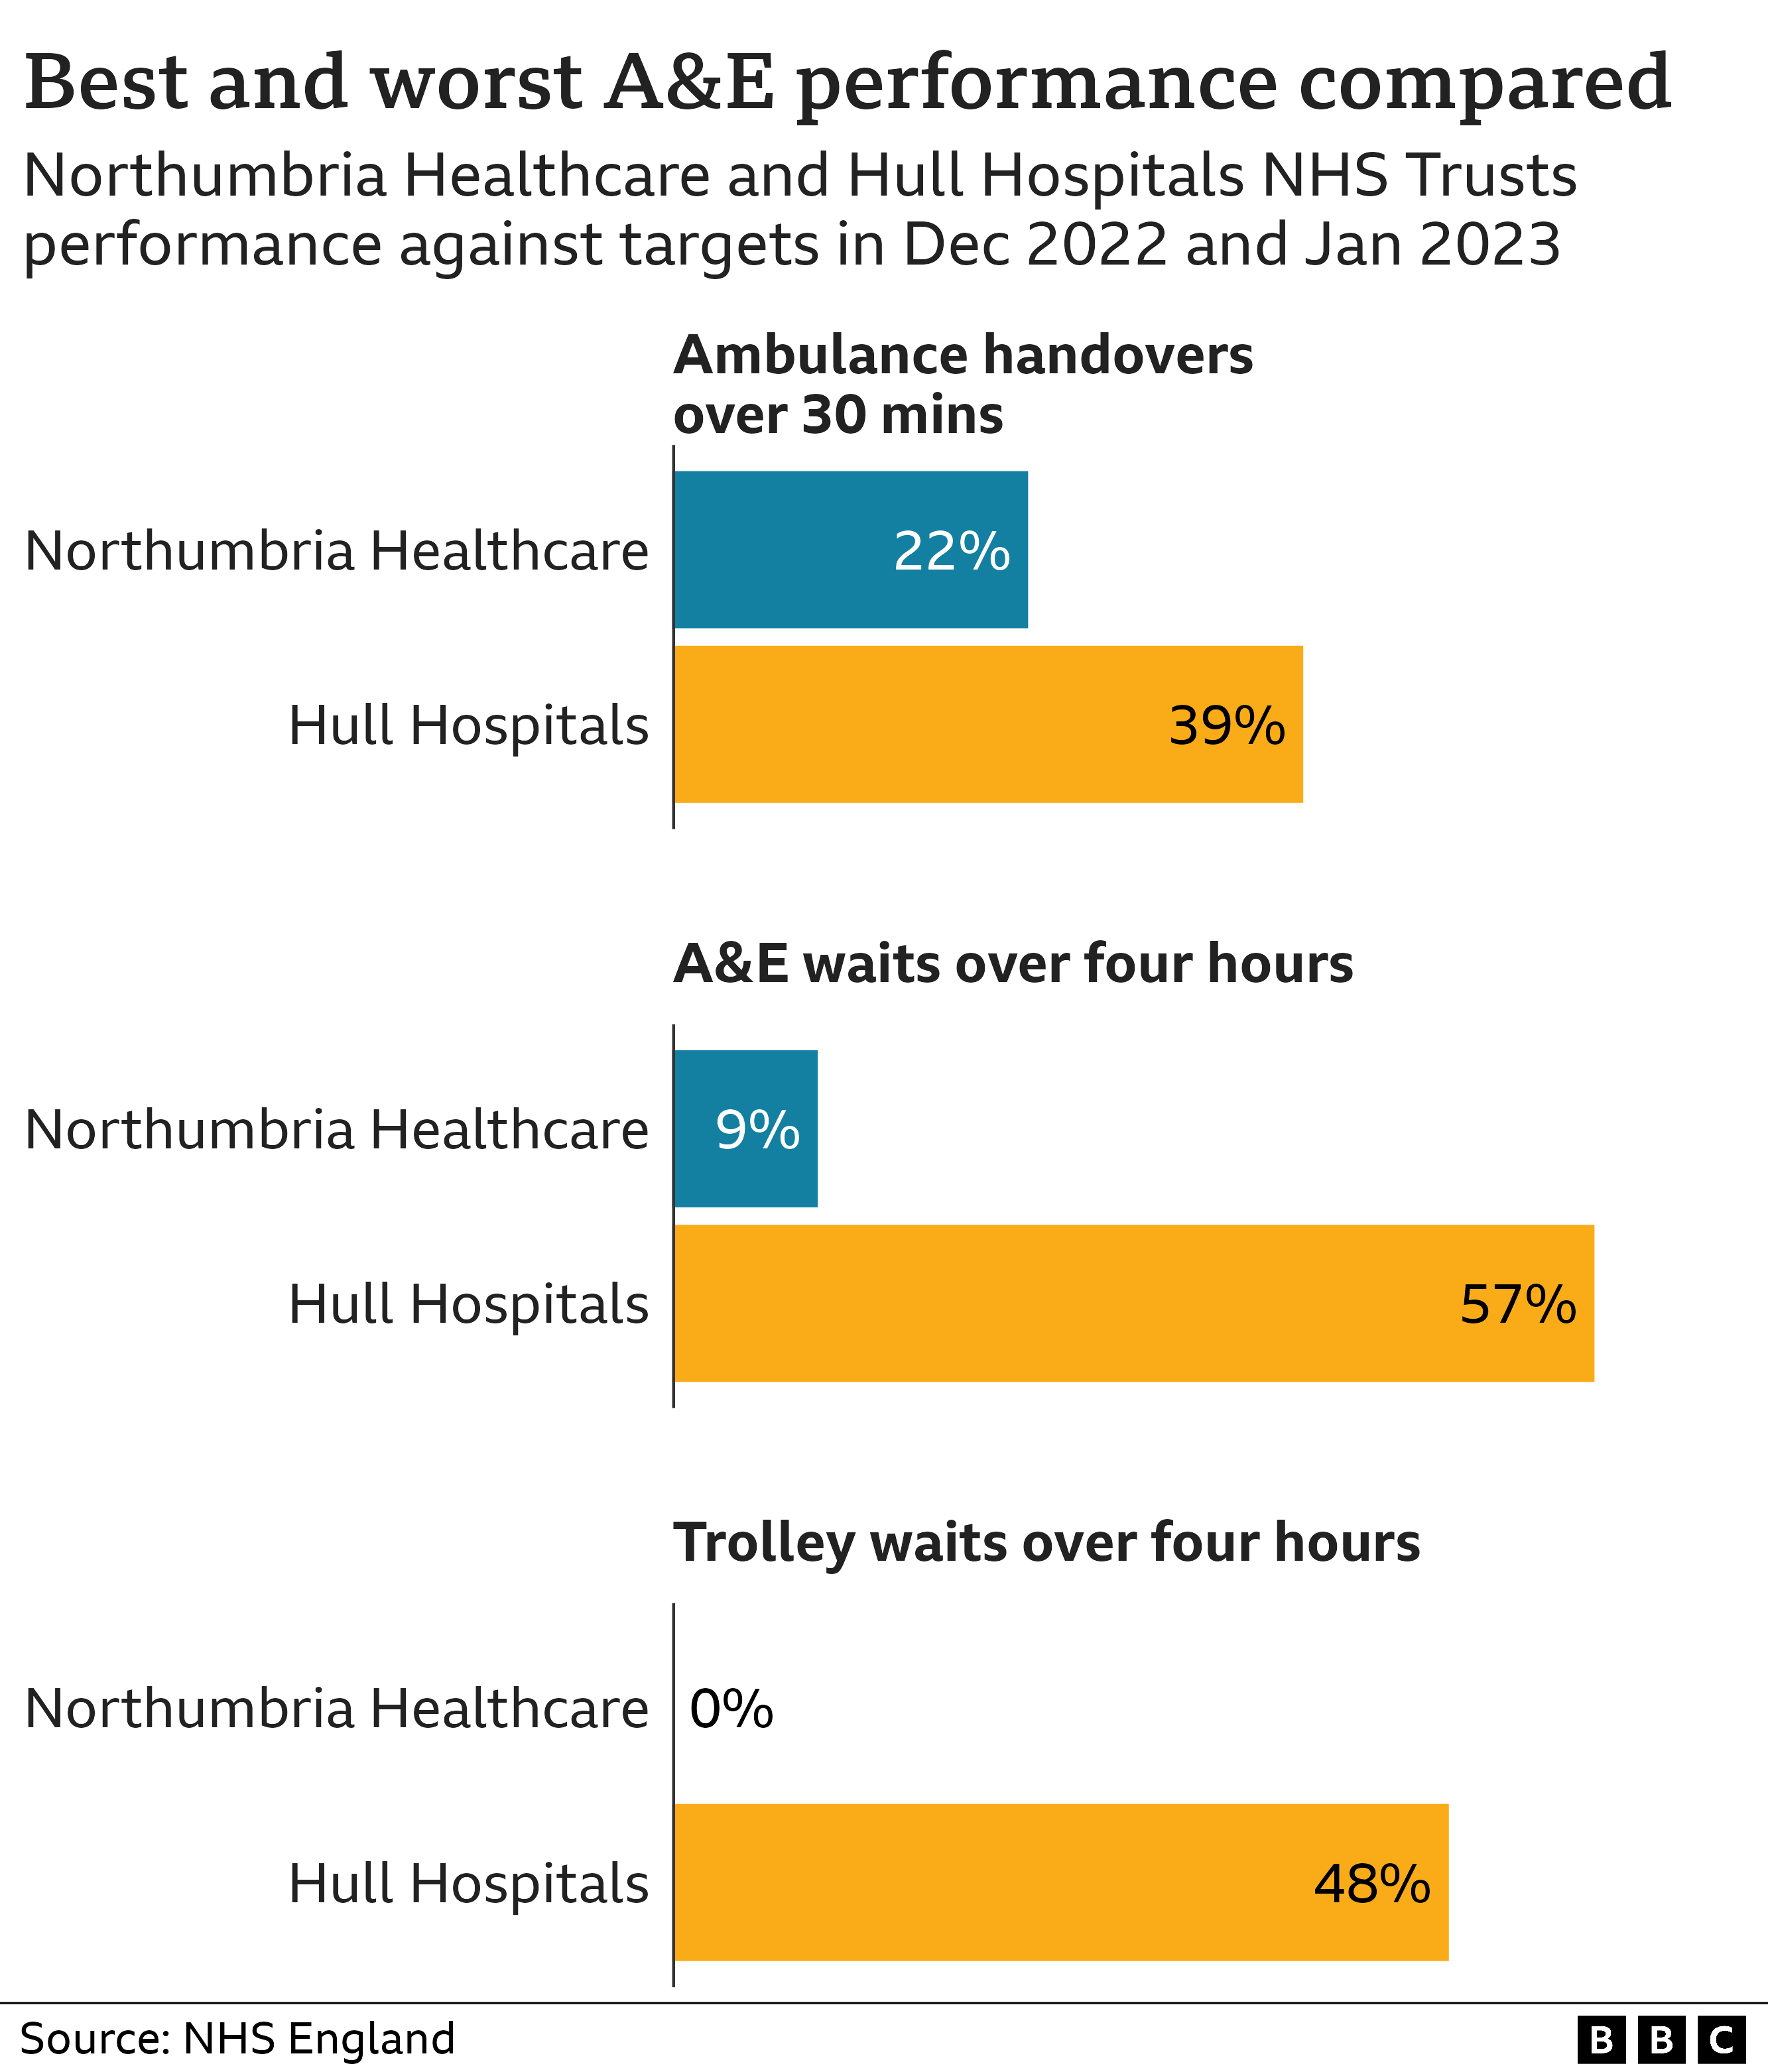 Bar chart showing A&E waits over four hours, ambulance handovers over 30 mins and trolley waits over four hours compared at Northumbria and Hull NHS trusts. Hull had 39% of handovers over 30 mins, while northumbria had 22%, Hull had 57% A&E waits over four hours while Northumbria had 9%, Hull had 48% trolley waits over four hours while northumbia had 0%